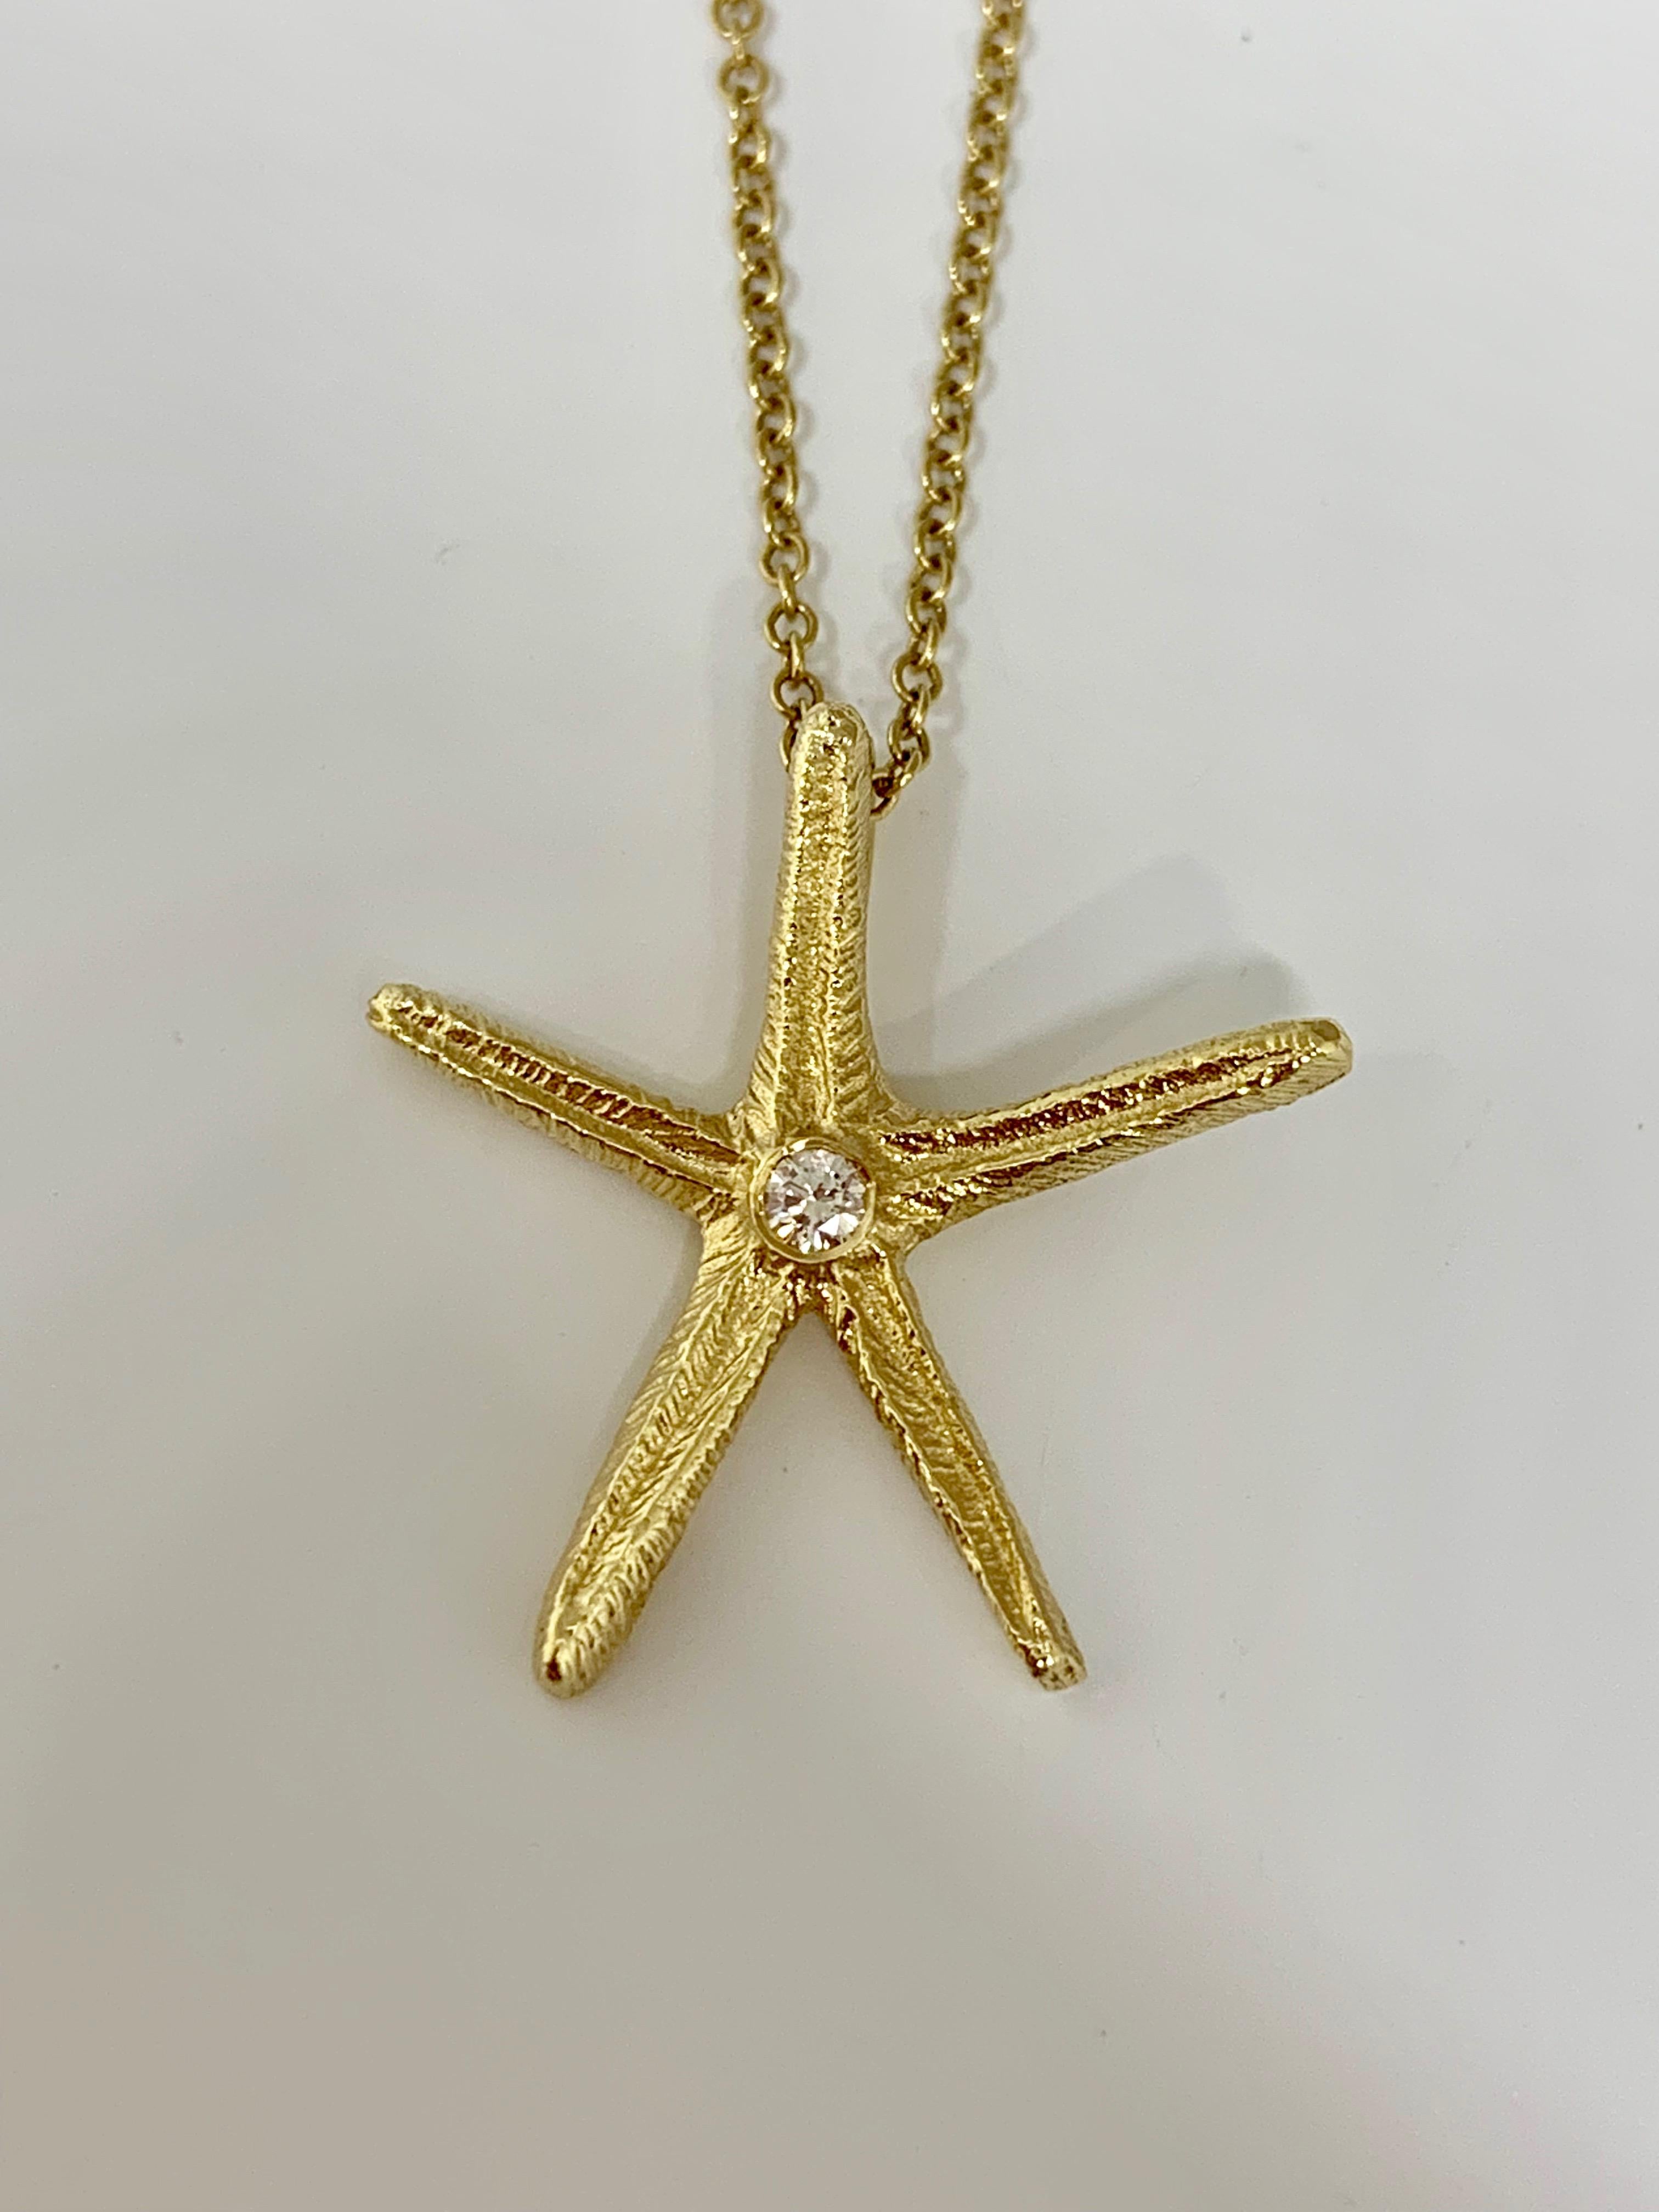 This gorgeous nautical style necklace features a single 0.05 carat round diamond in the center of the starfish along with beautiful texture throughout the body of the pendant. This necklace is made in 14K yellow gold and includes an 18 inch cable